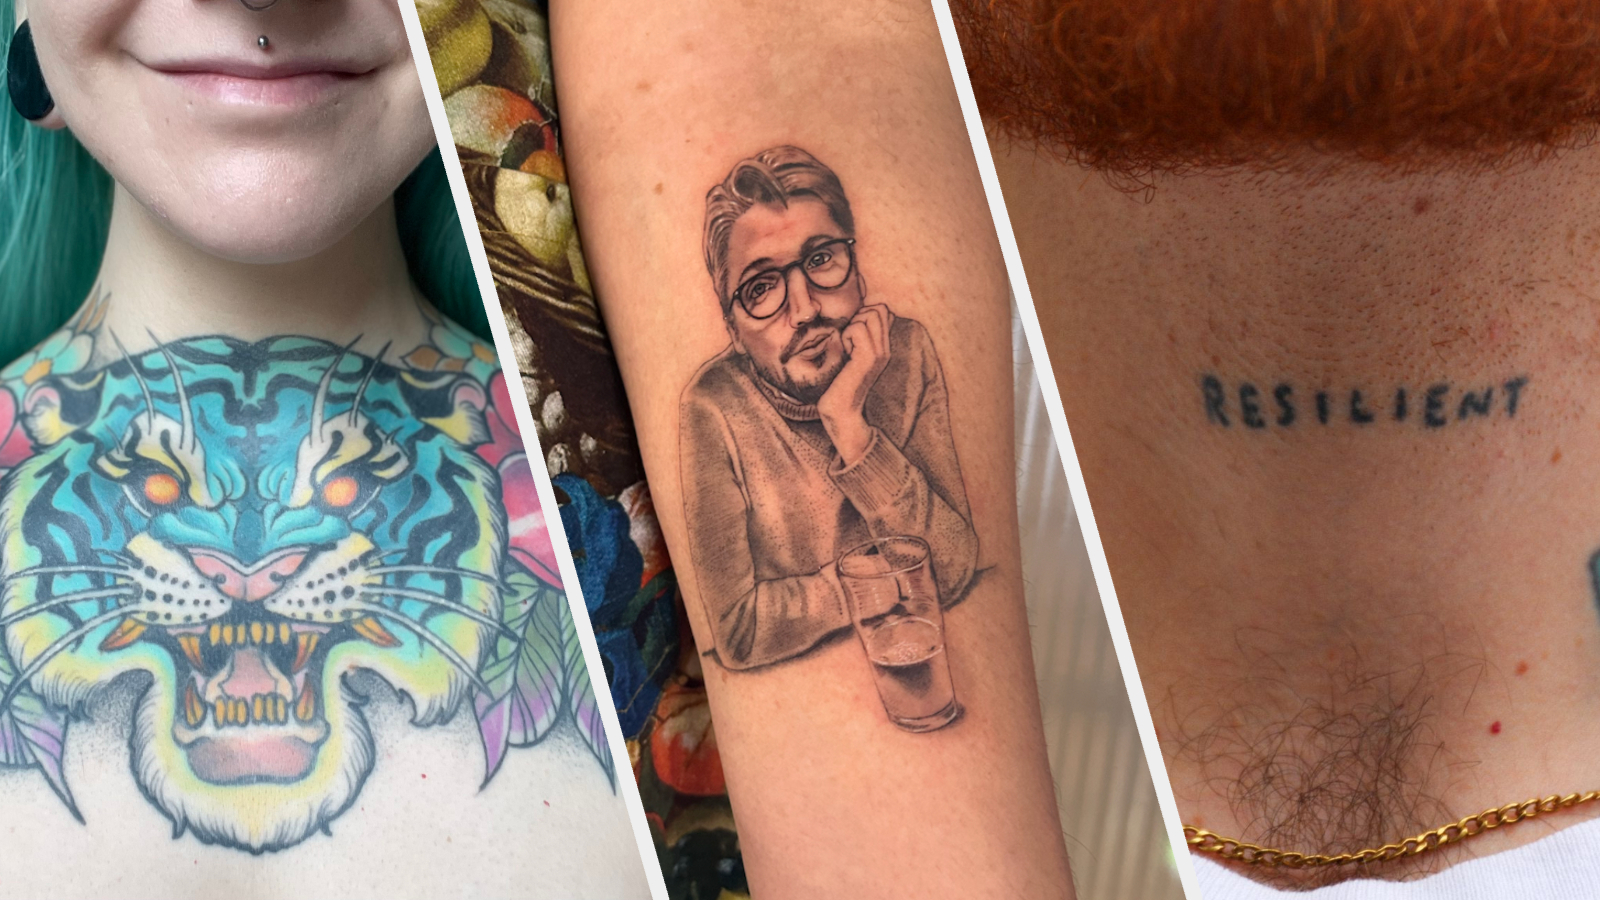 Would you get a tattoo that fades in a year? Now you can